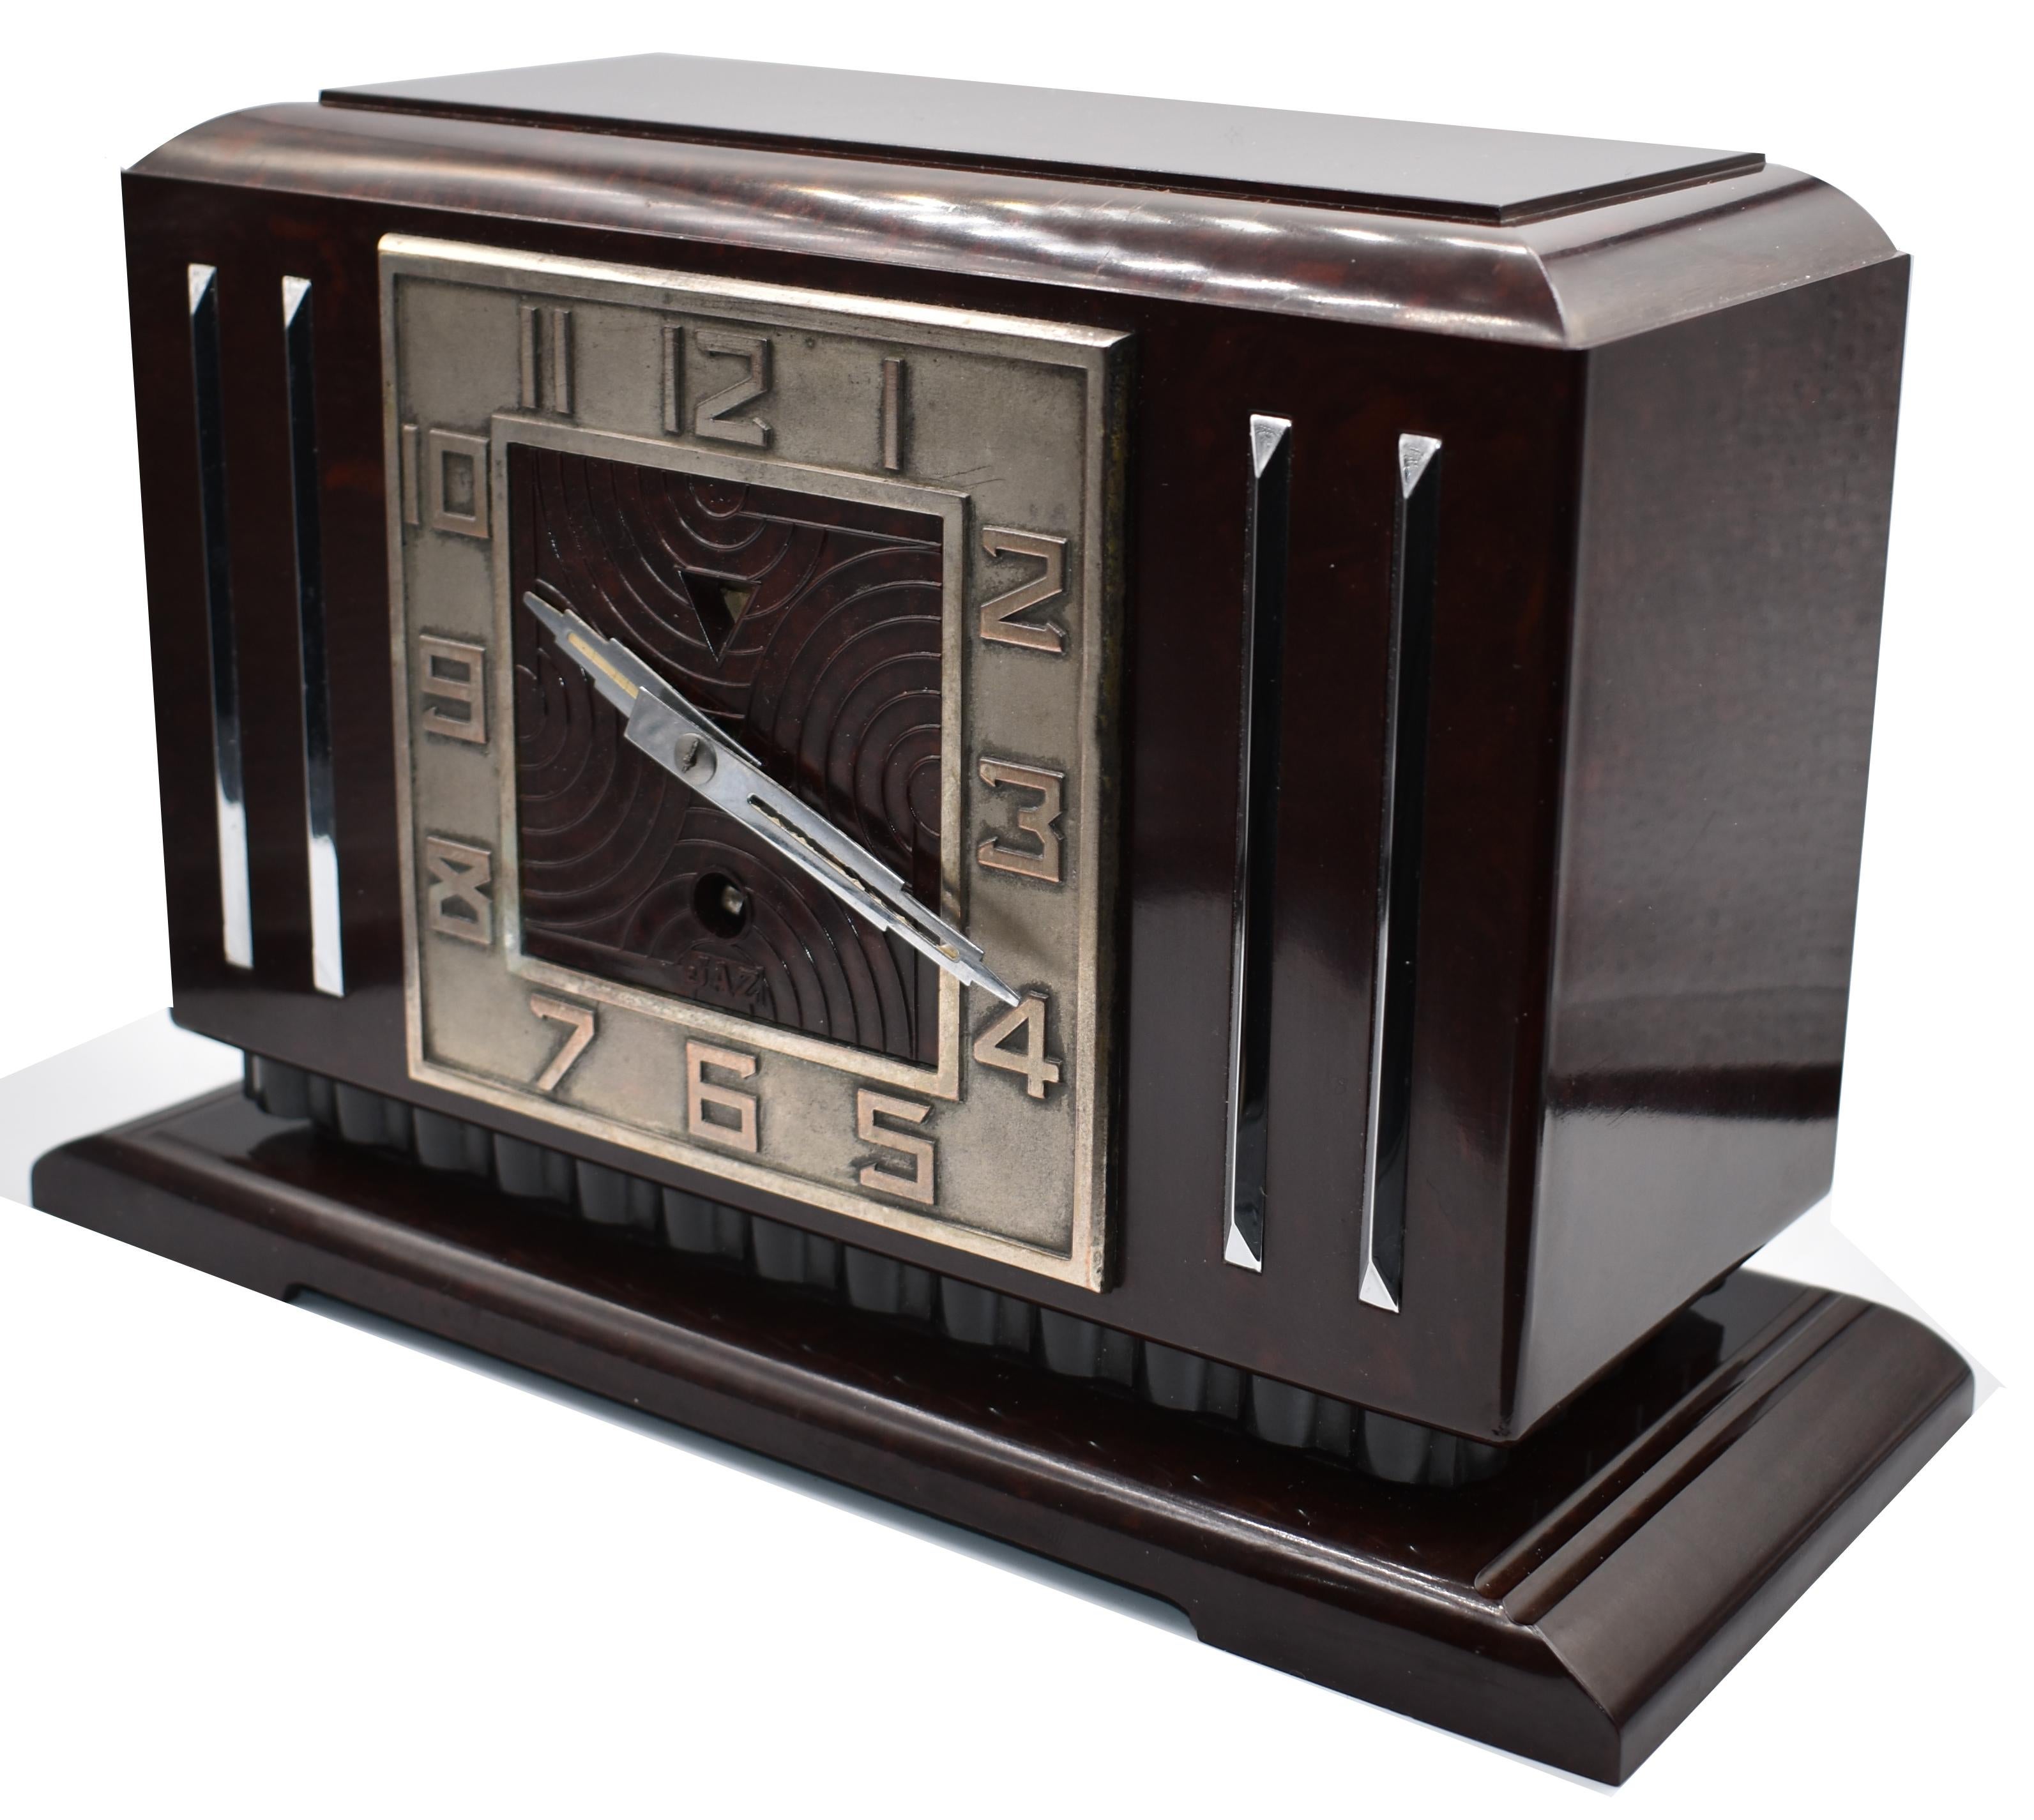 This is the daddy of true 1930s Art Deco clocks. Made in France by the very collectable JAZ company, this clock screams everything about the deco era we all love and admire, streamline, Industrial and modernist. The casing is a mottled deep red